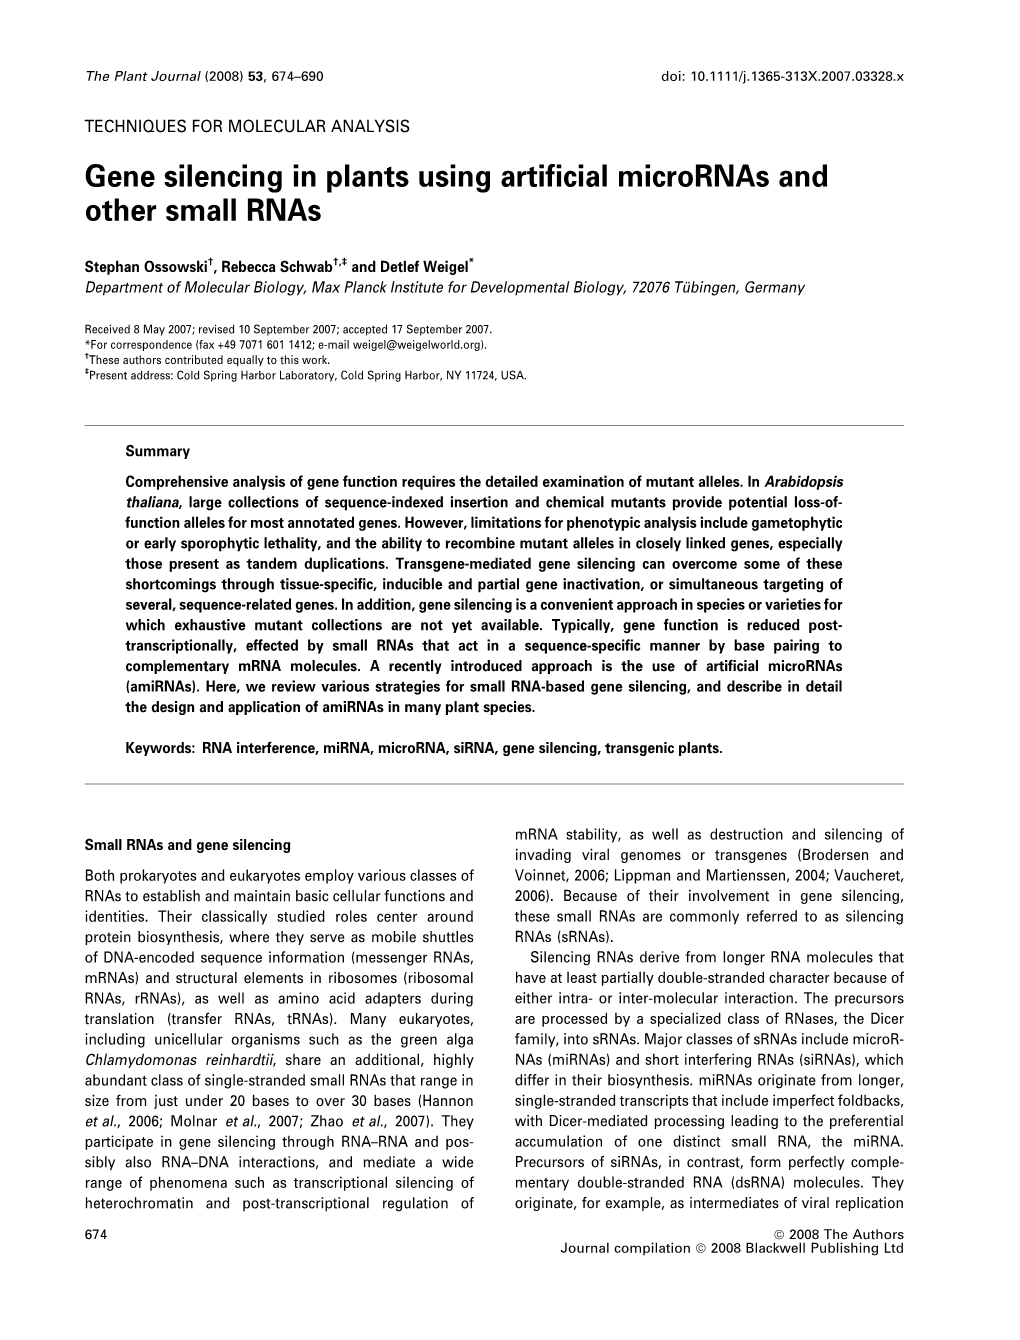 Gene Silencing in Plants Using Artificial Micrornas and Other Small Rnas